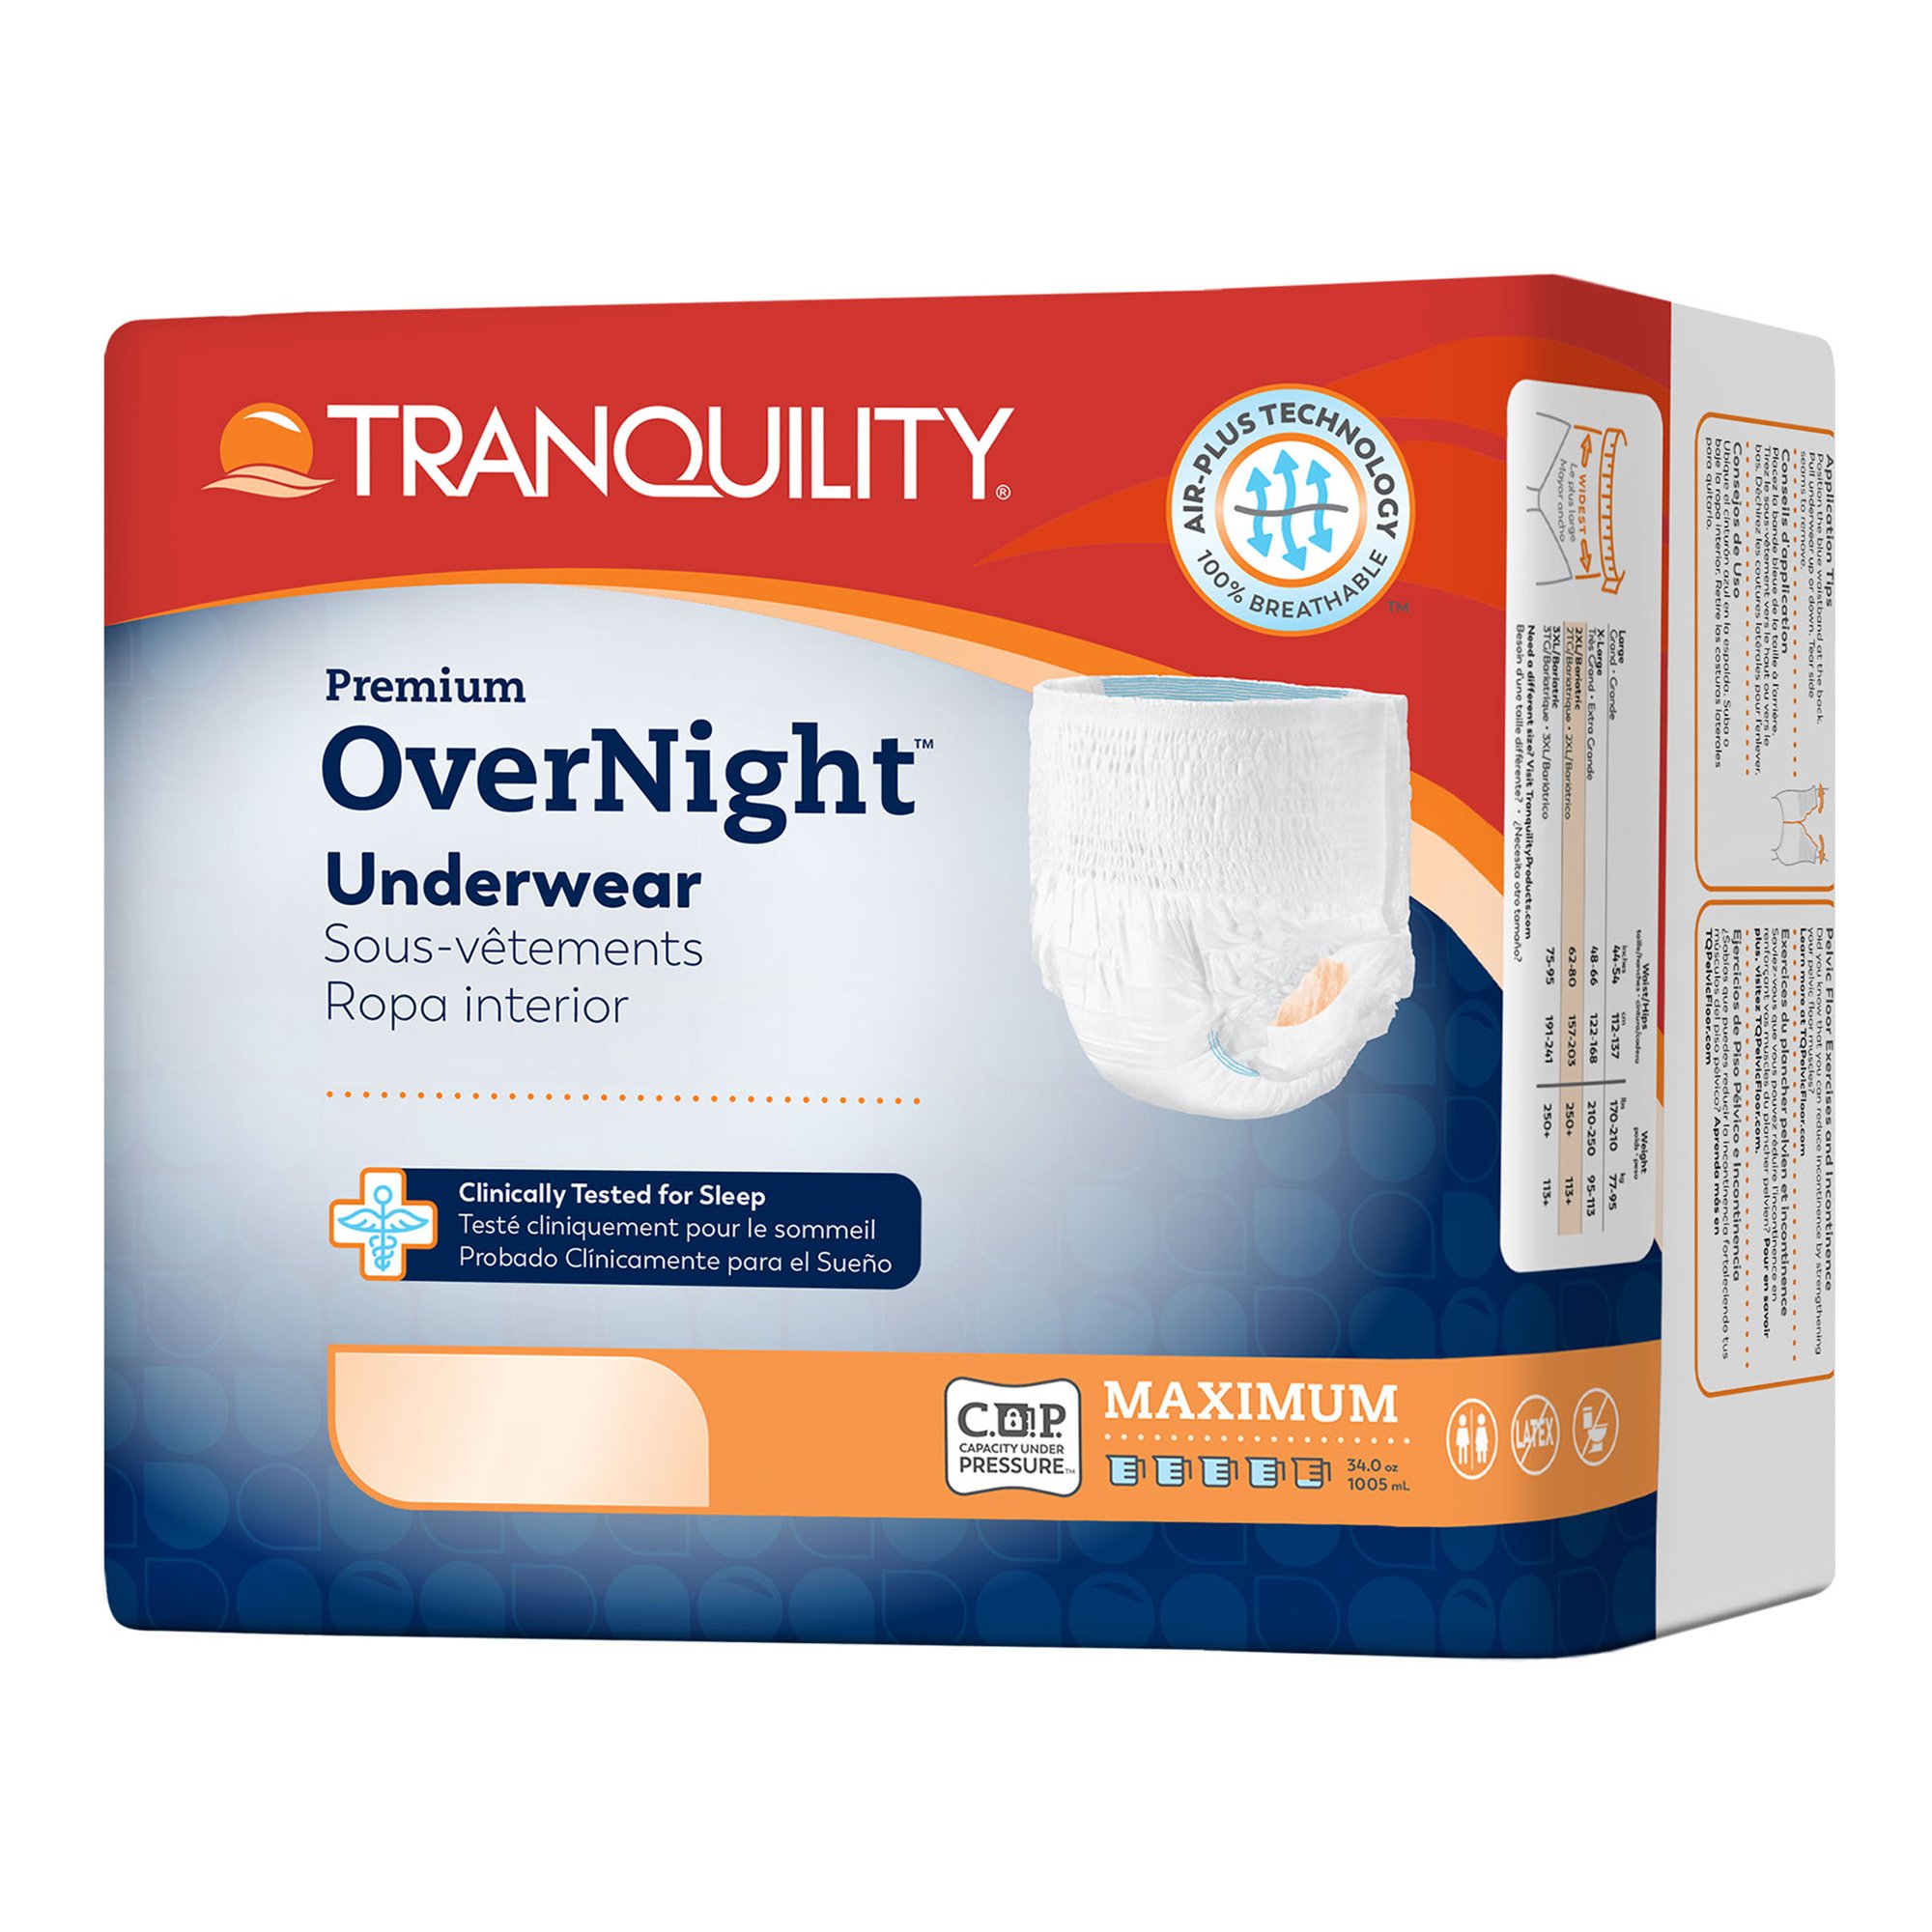 Tranquility Premium OverNight Disposable Absorbent Underwear, X-Large, Maximum Protection, 14 ct Bag - image 2 of 3